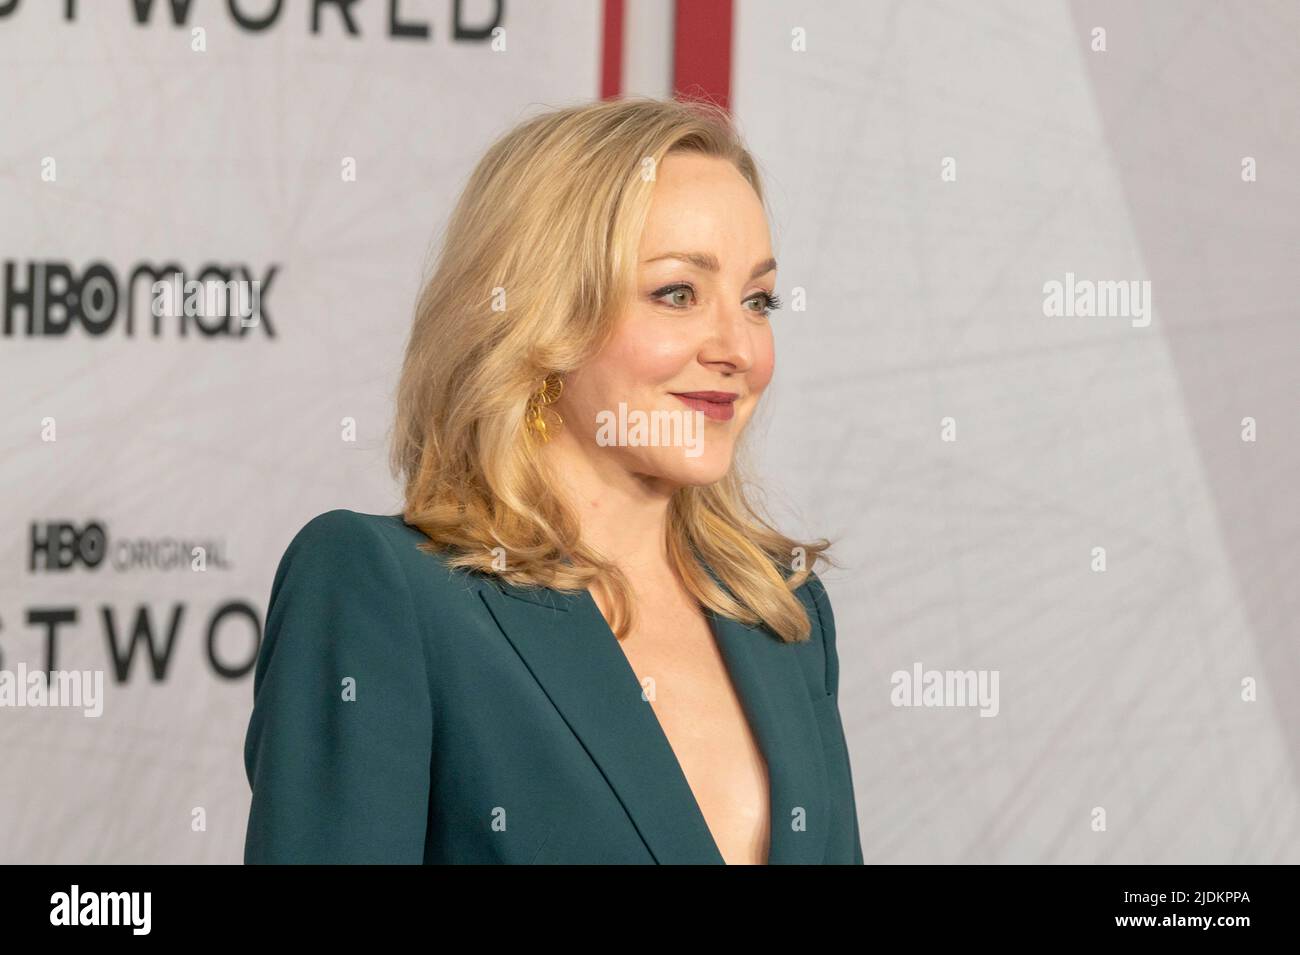 NEW YORK, NEW YORK - JUNE 21: Geneva Carr attends HBO's 'Westworld' Season 4 premiere at Alice Tully Hall, Lincoln Center on June 21, 2022 in New York City. Stock Photo